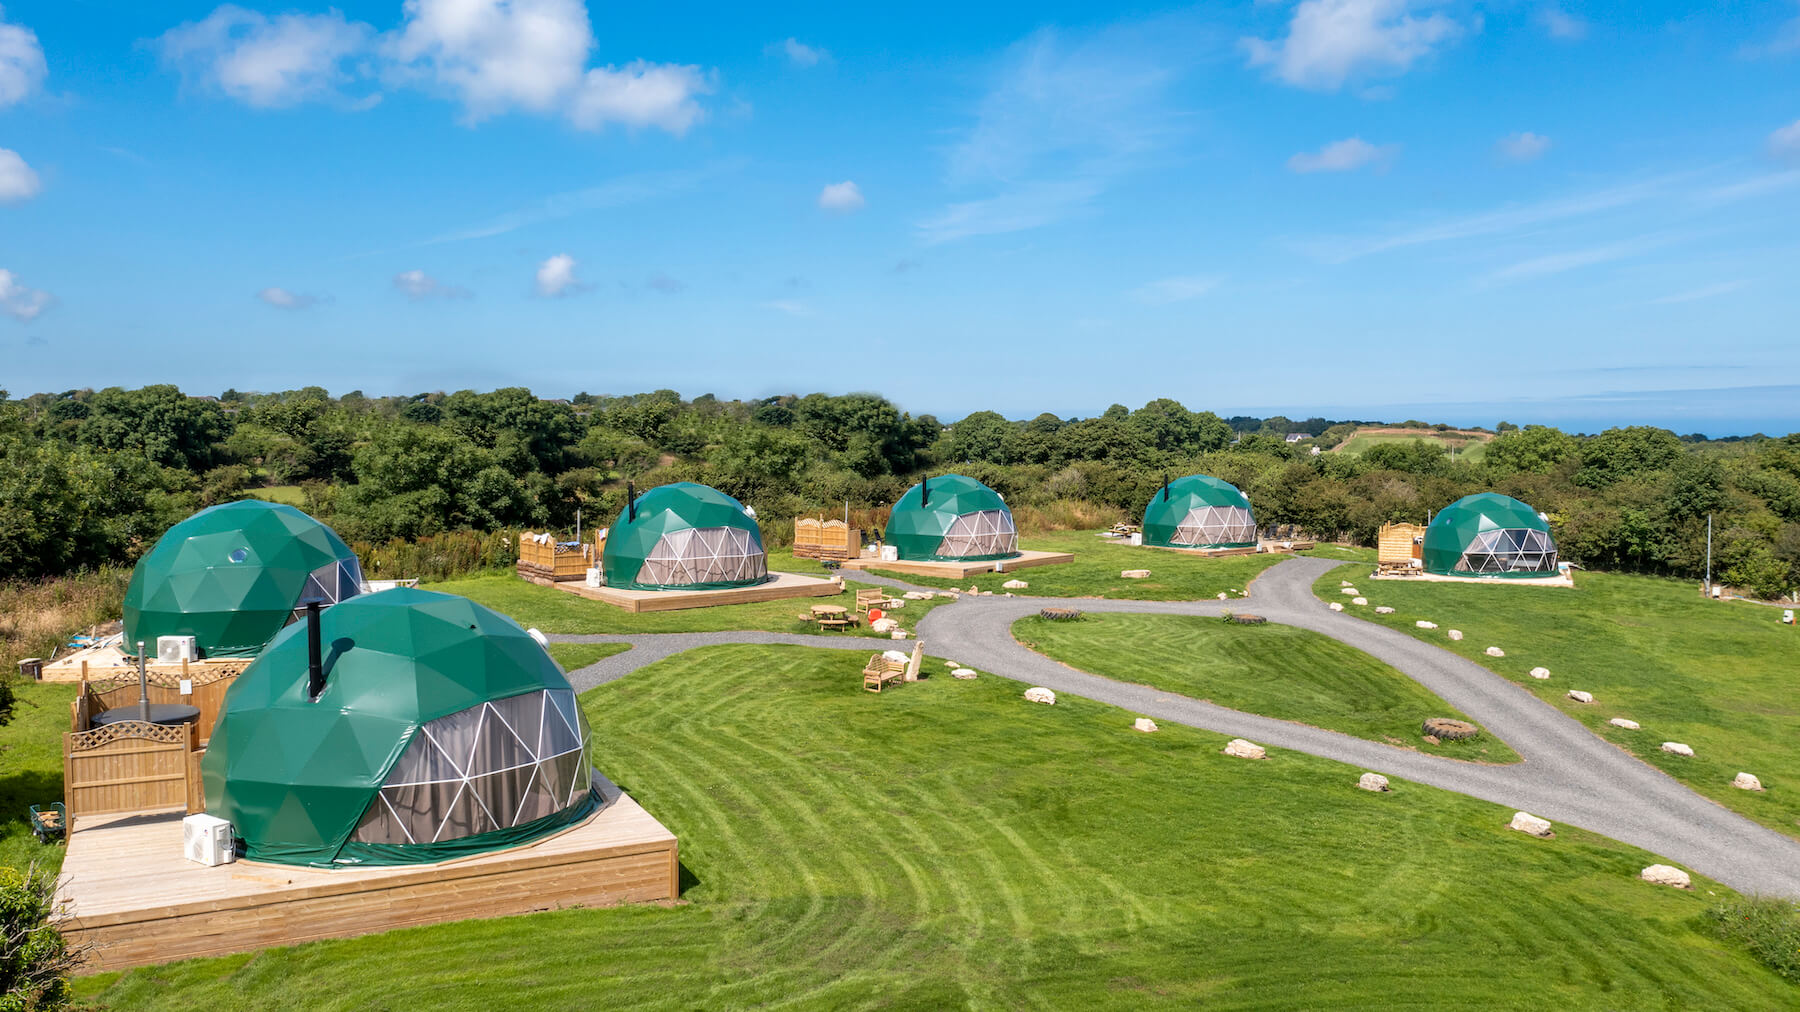 Is setting up a glamping business worth considering?